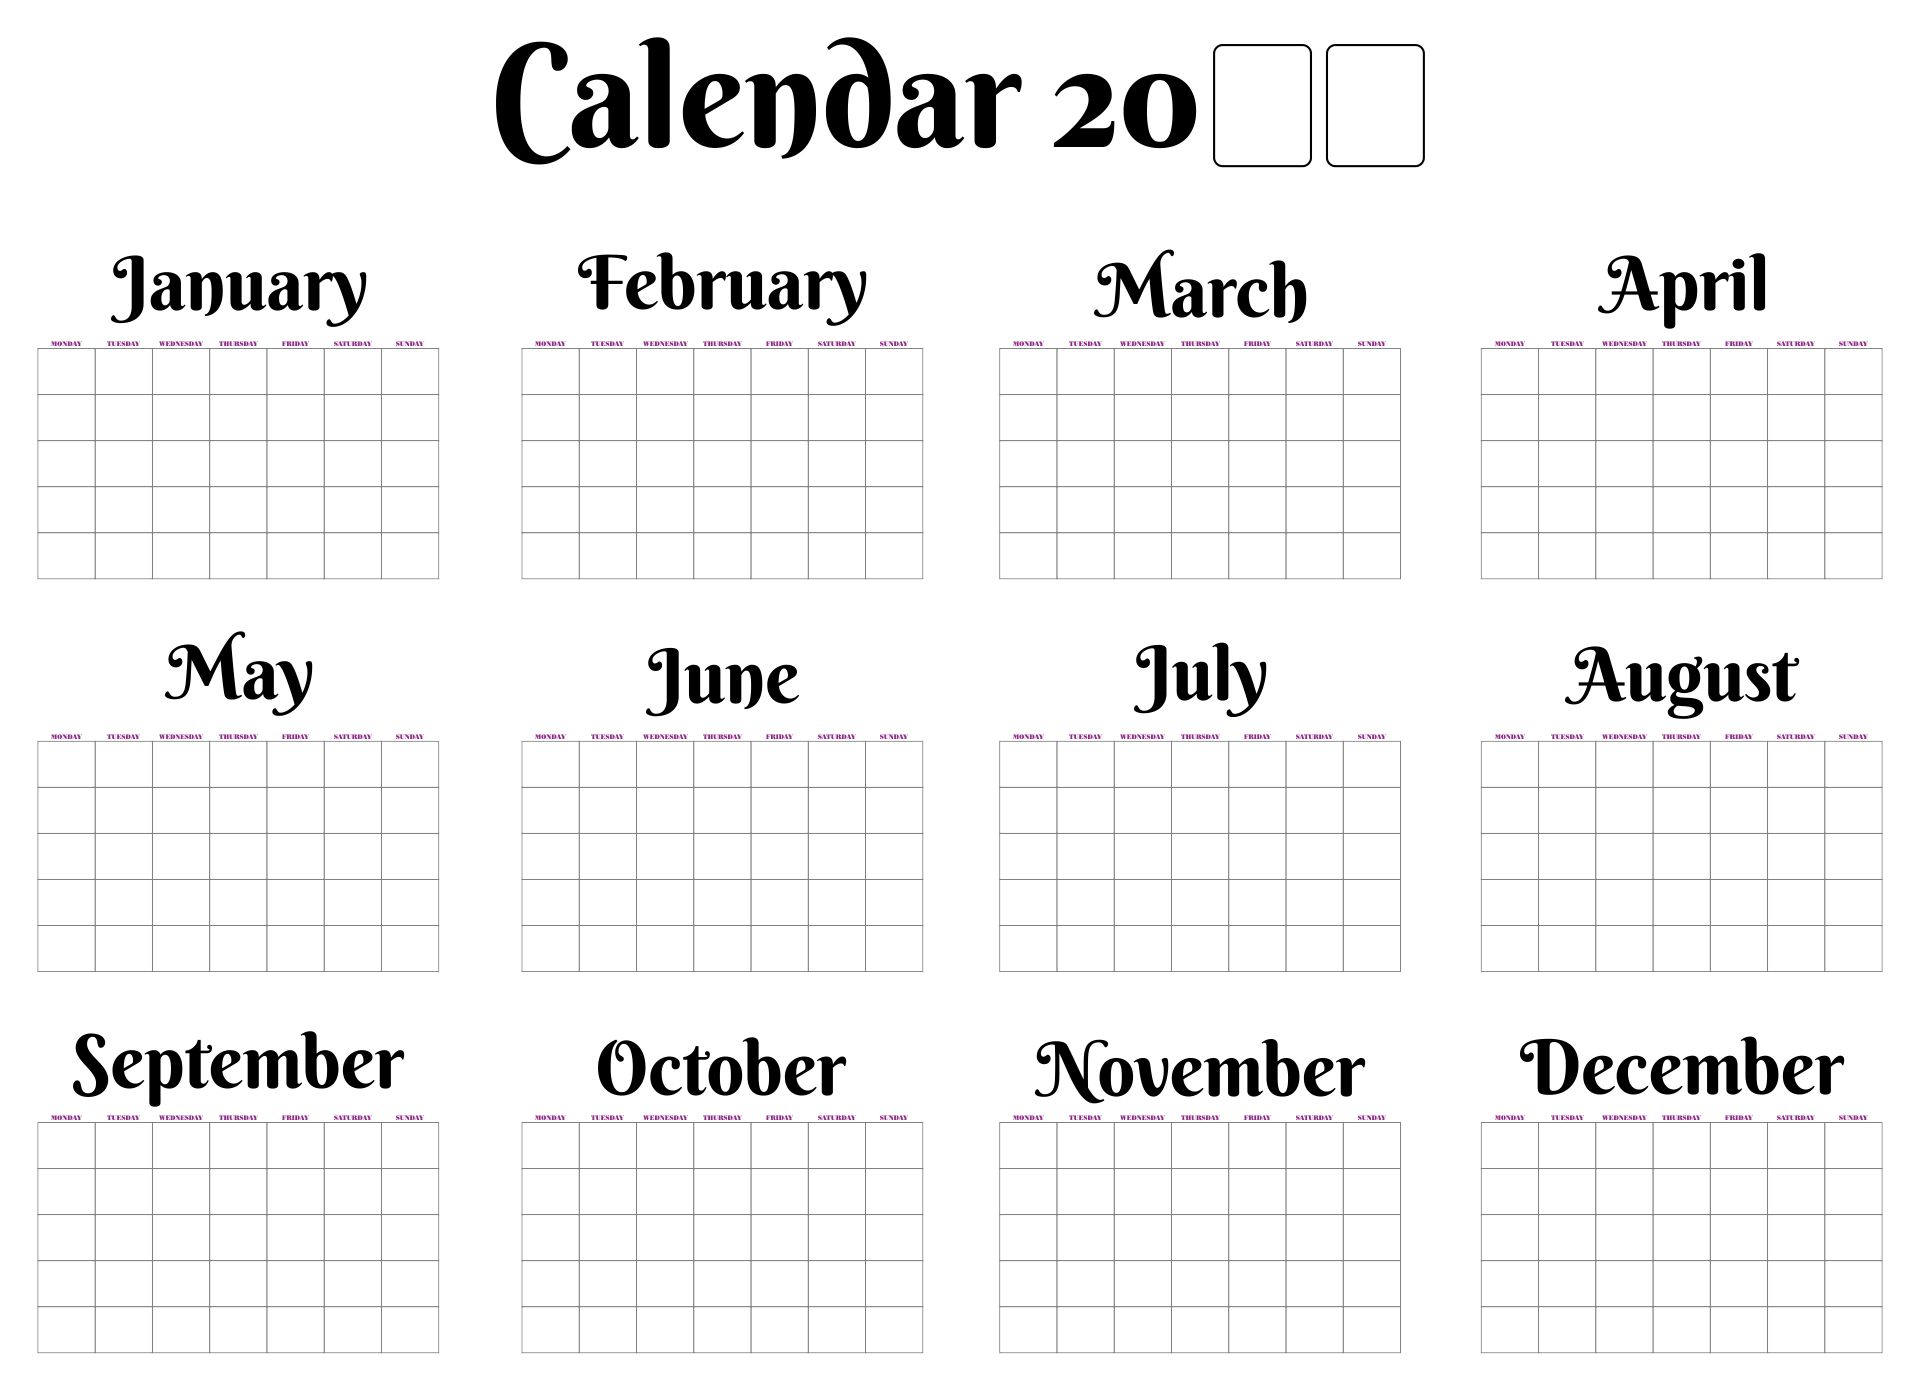 4-best-images-of-easy-to-use-printable-calendars-free-printable